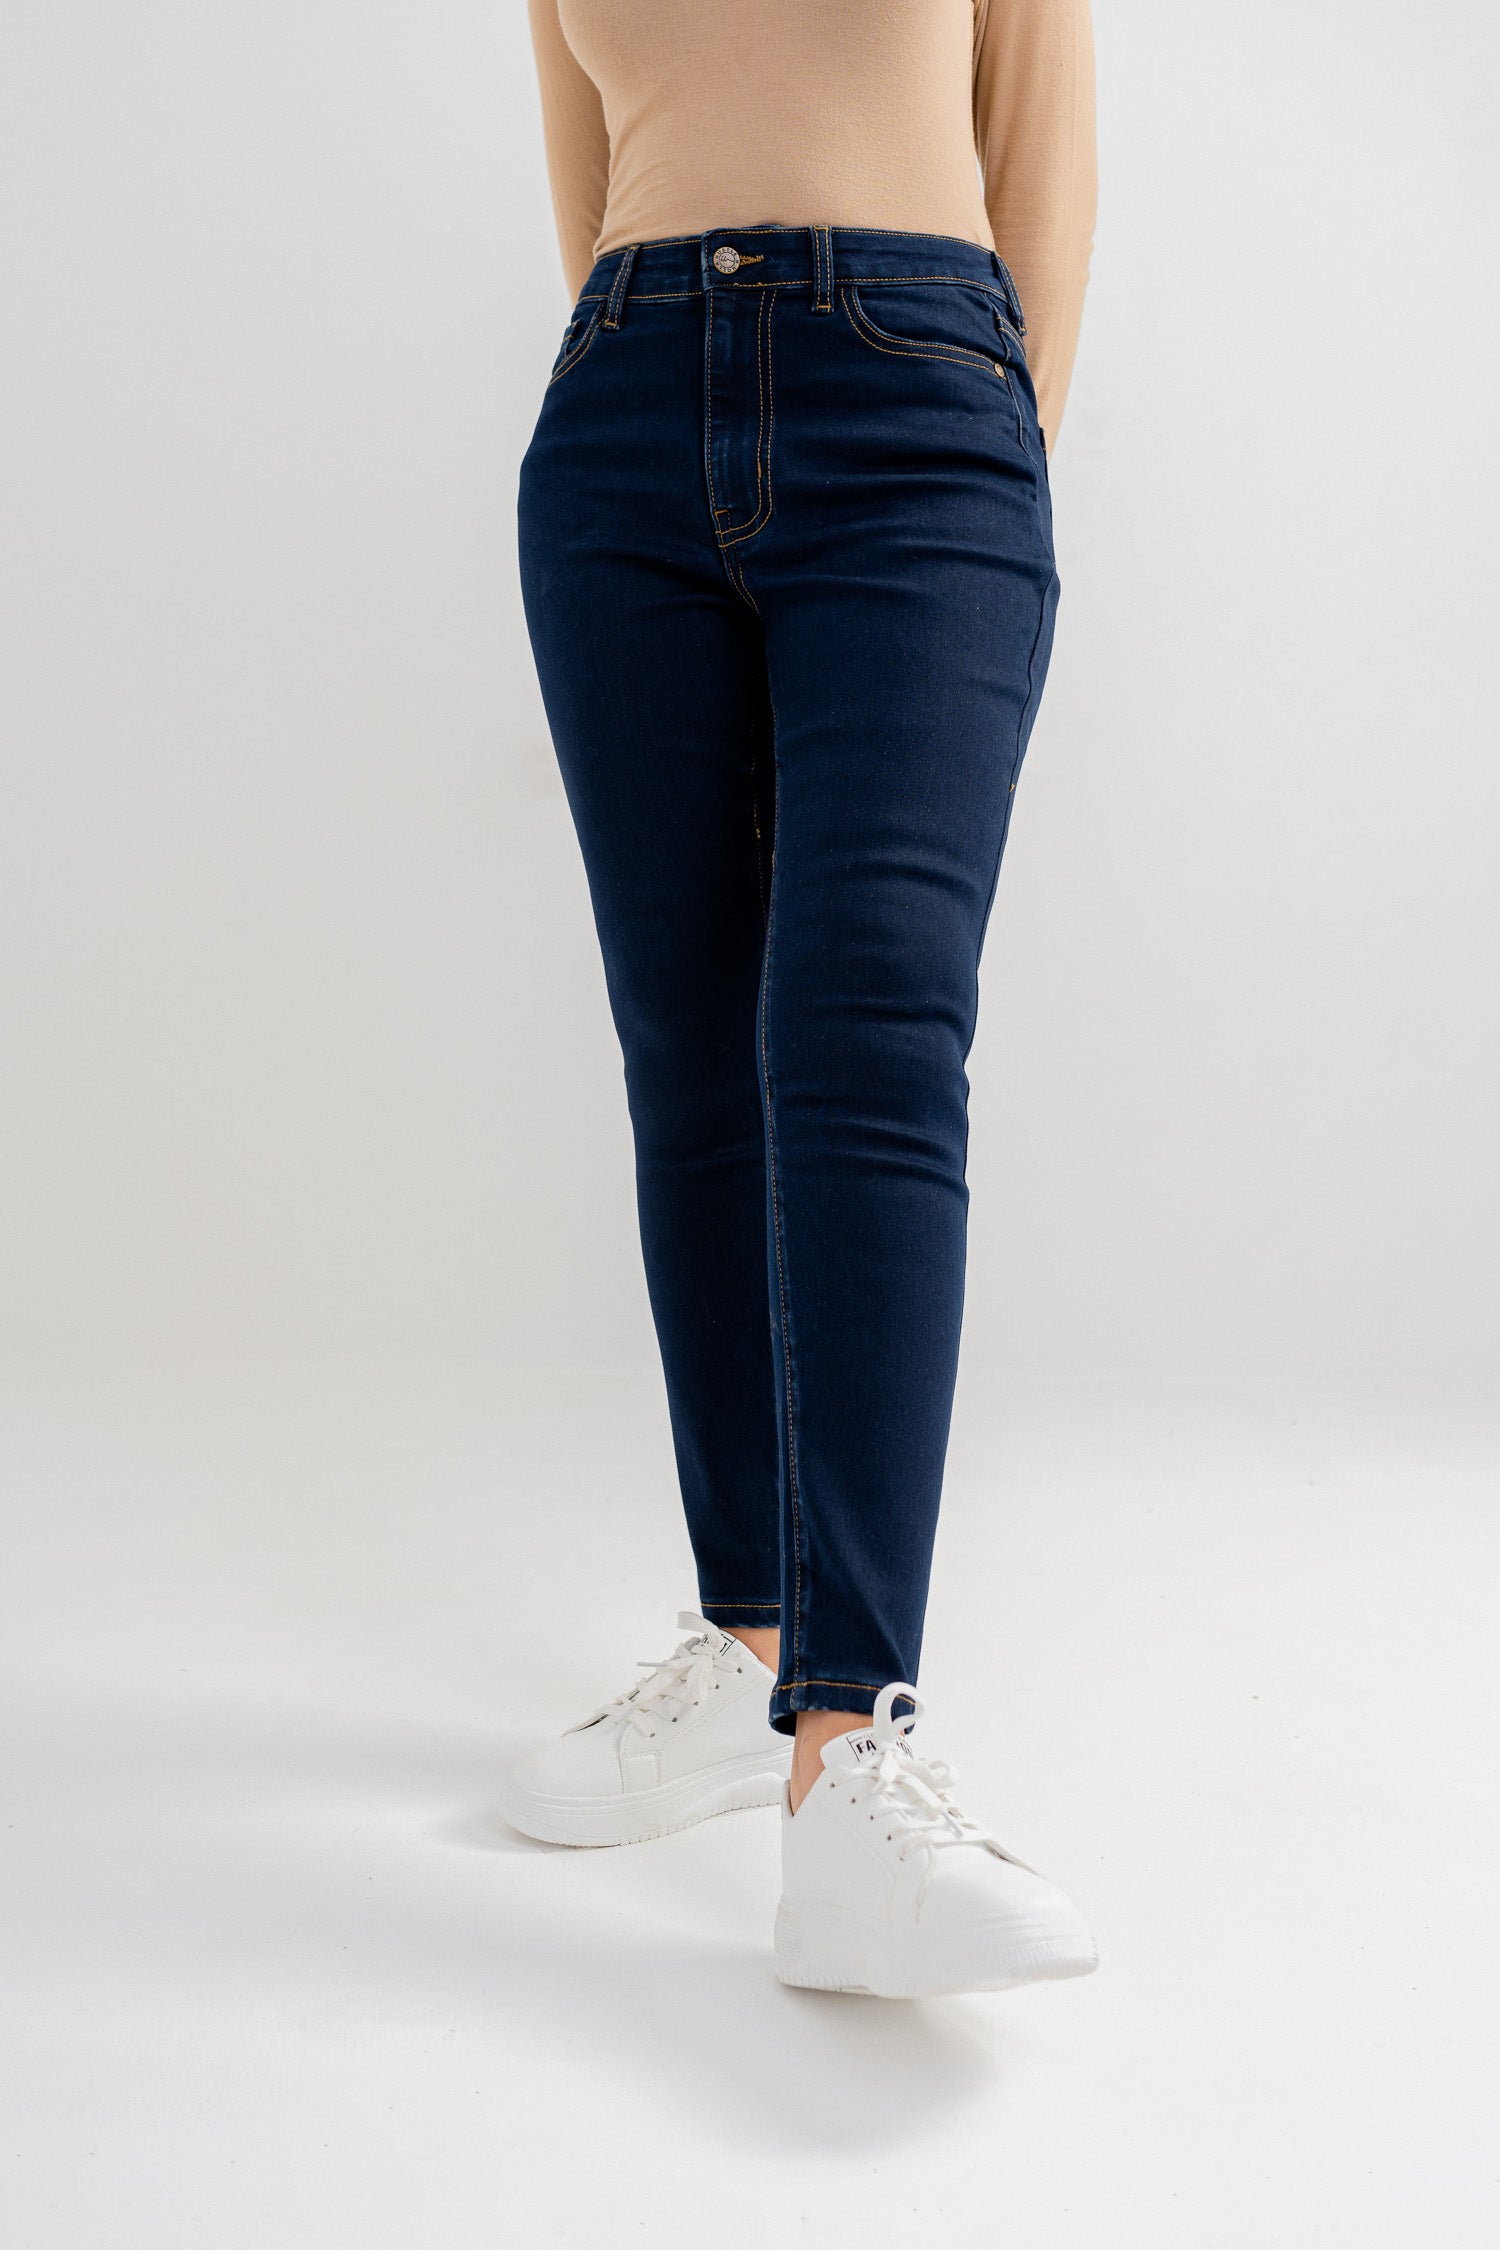 Amyra Basic Fit Jeans